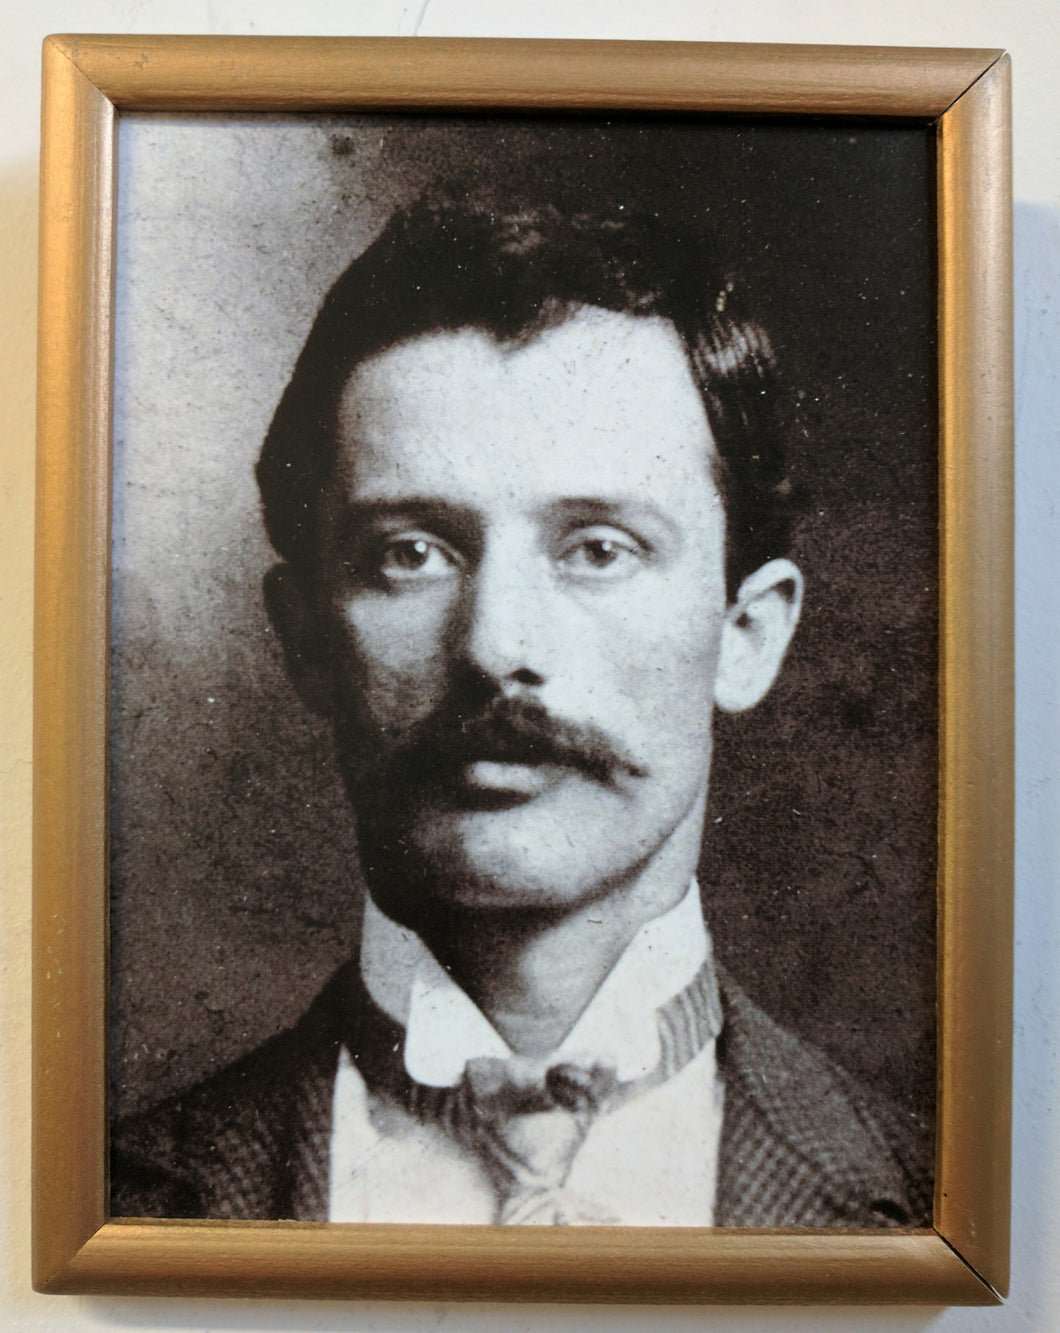 3076 Portrait of Man with Mustache Early 20th Century Black and White